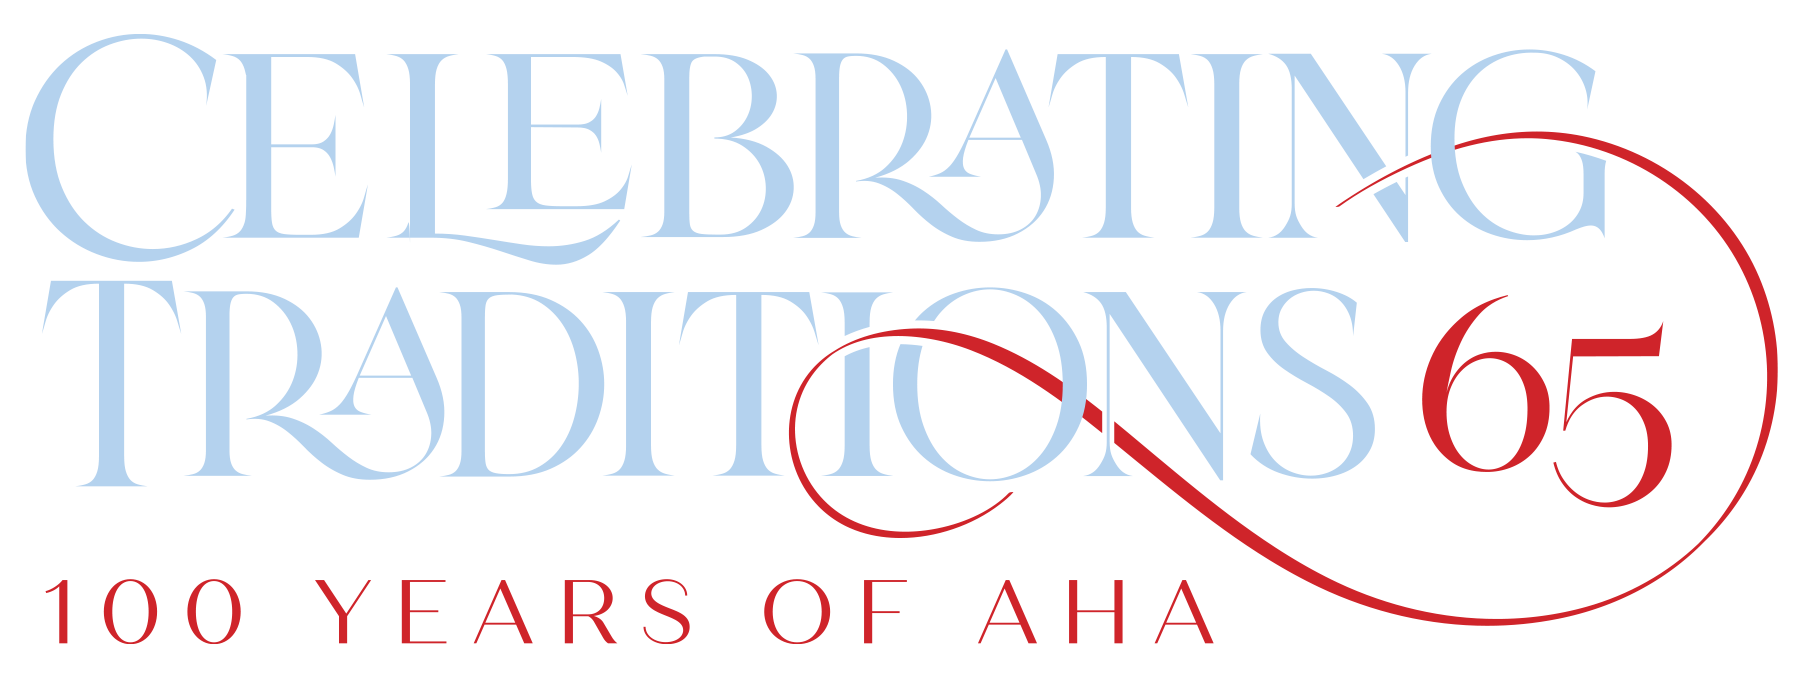 Celebrating Traditions 100 Years of the American Heart Association Graphic